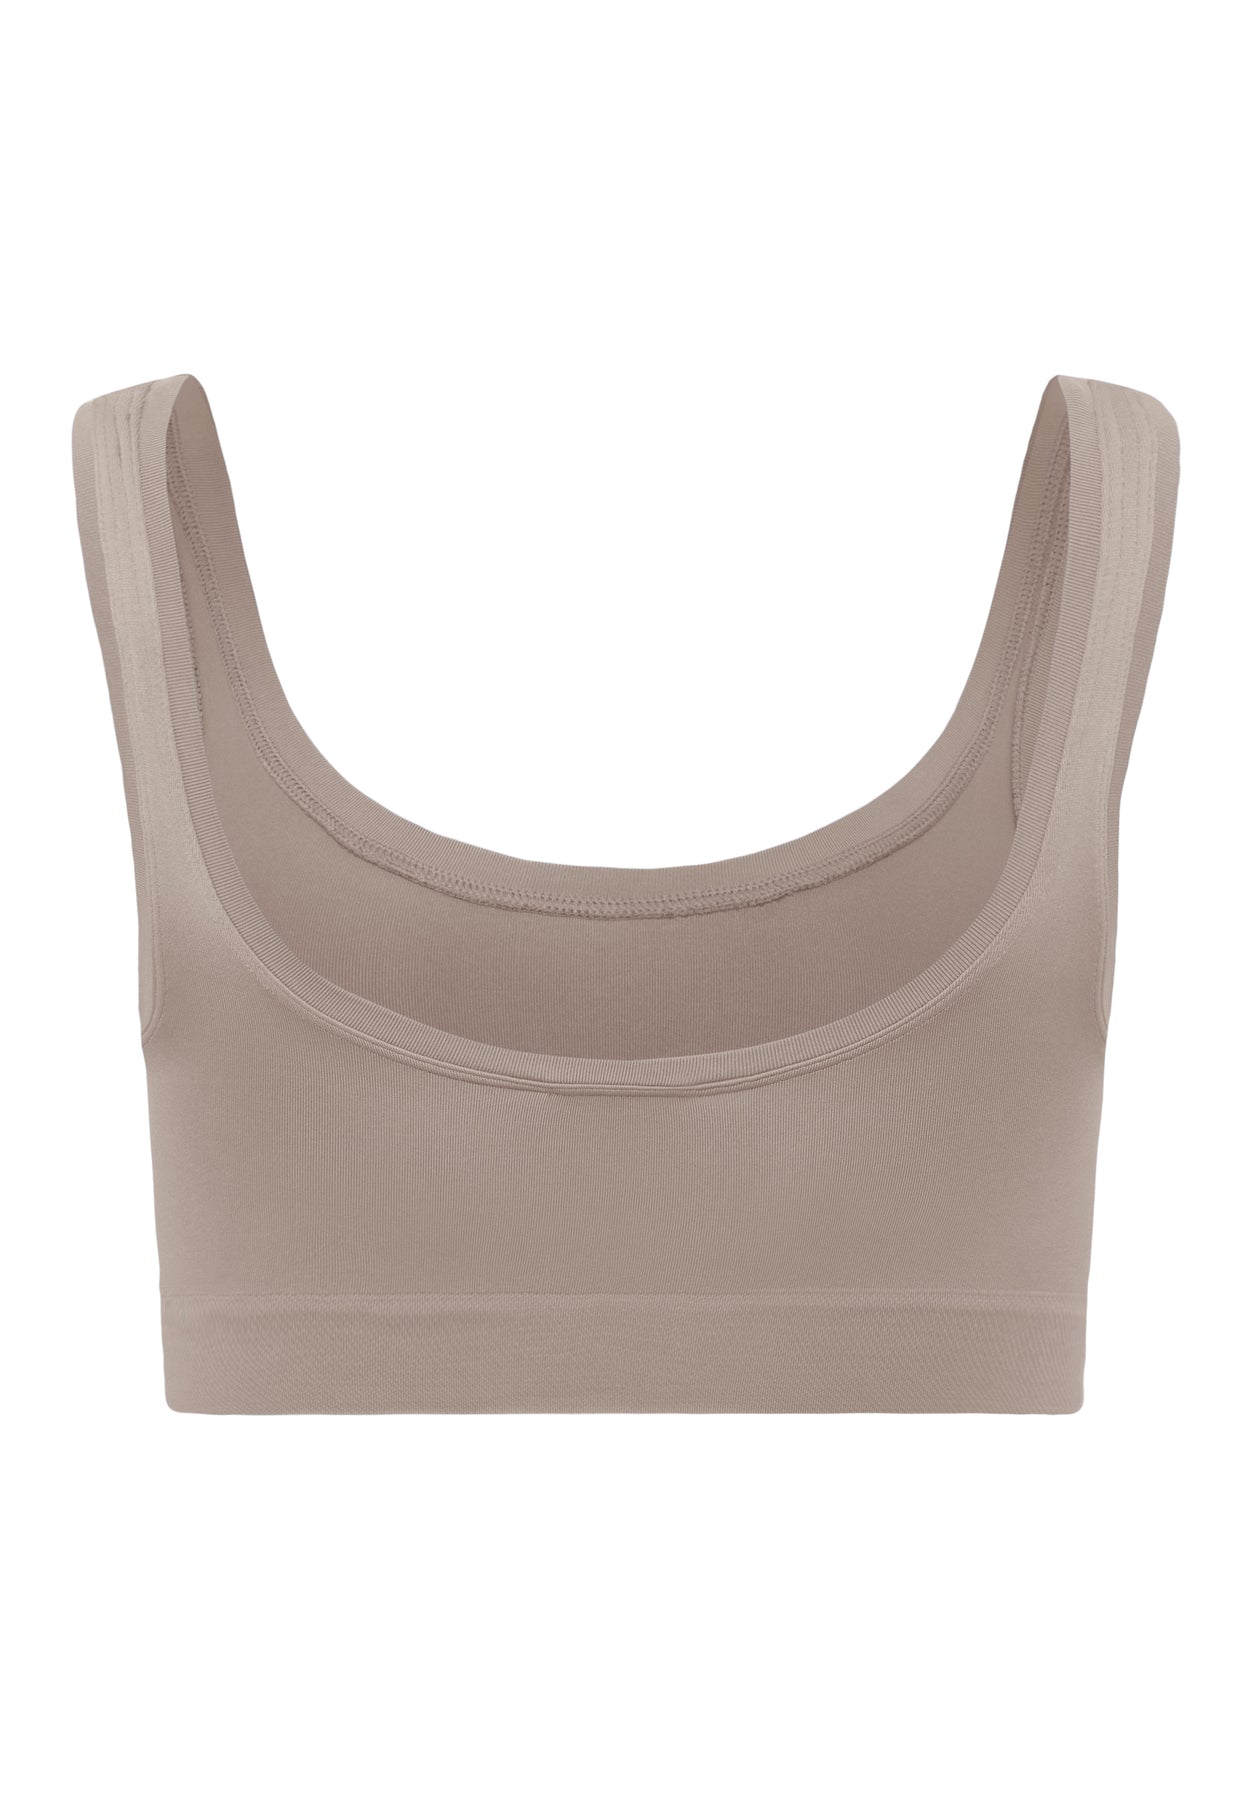 Hanro Touch Feeling Bralette Crop Top Non Wired Bra in Taupe Grey